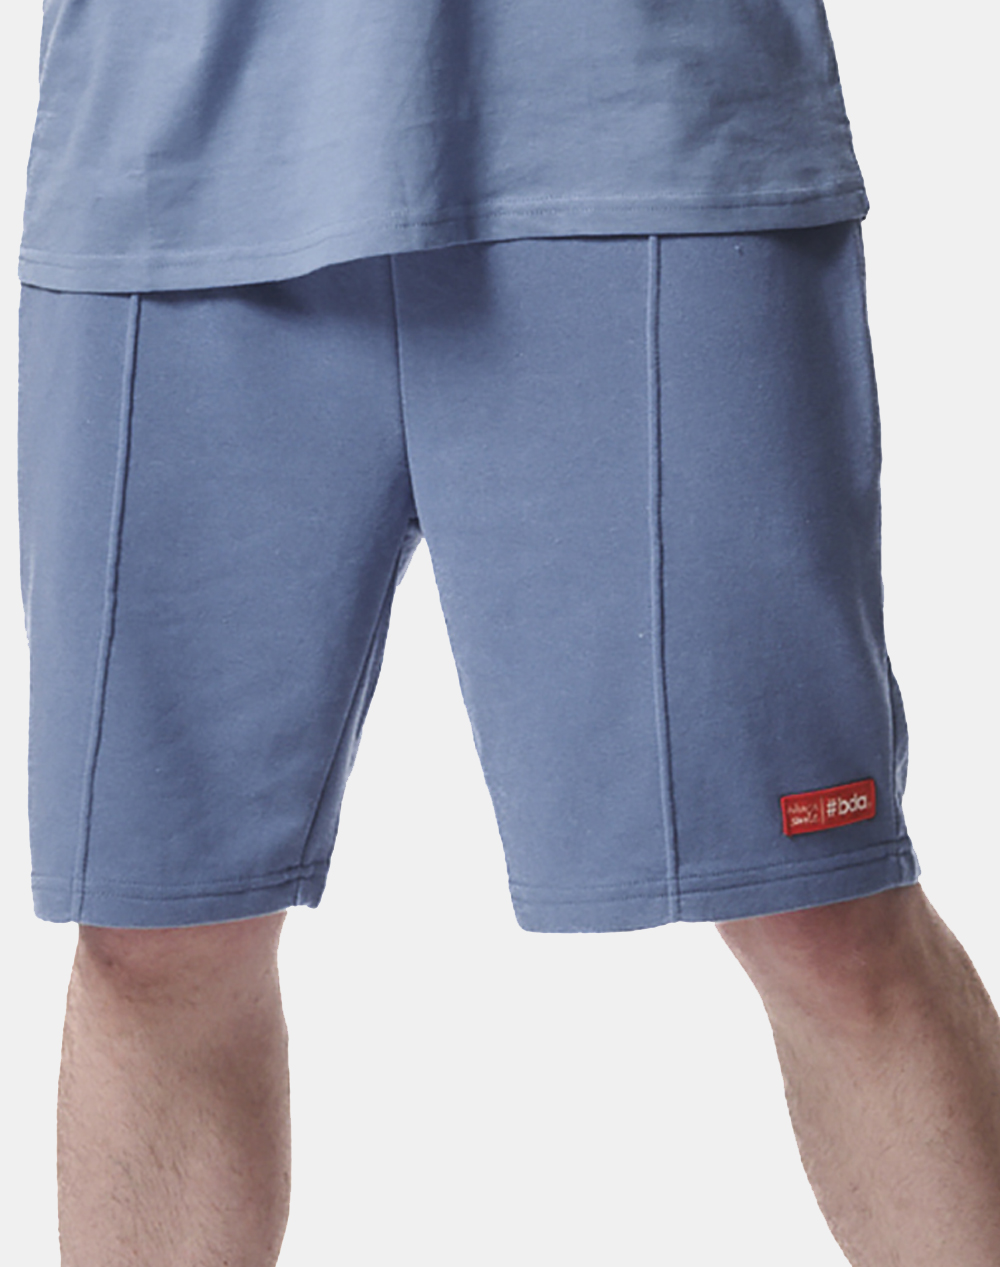 BODY ACTION MEN''S ATHLEISURE STYLE SHORTS